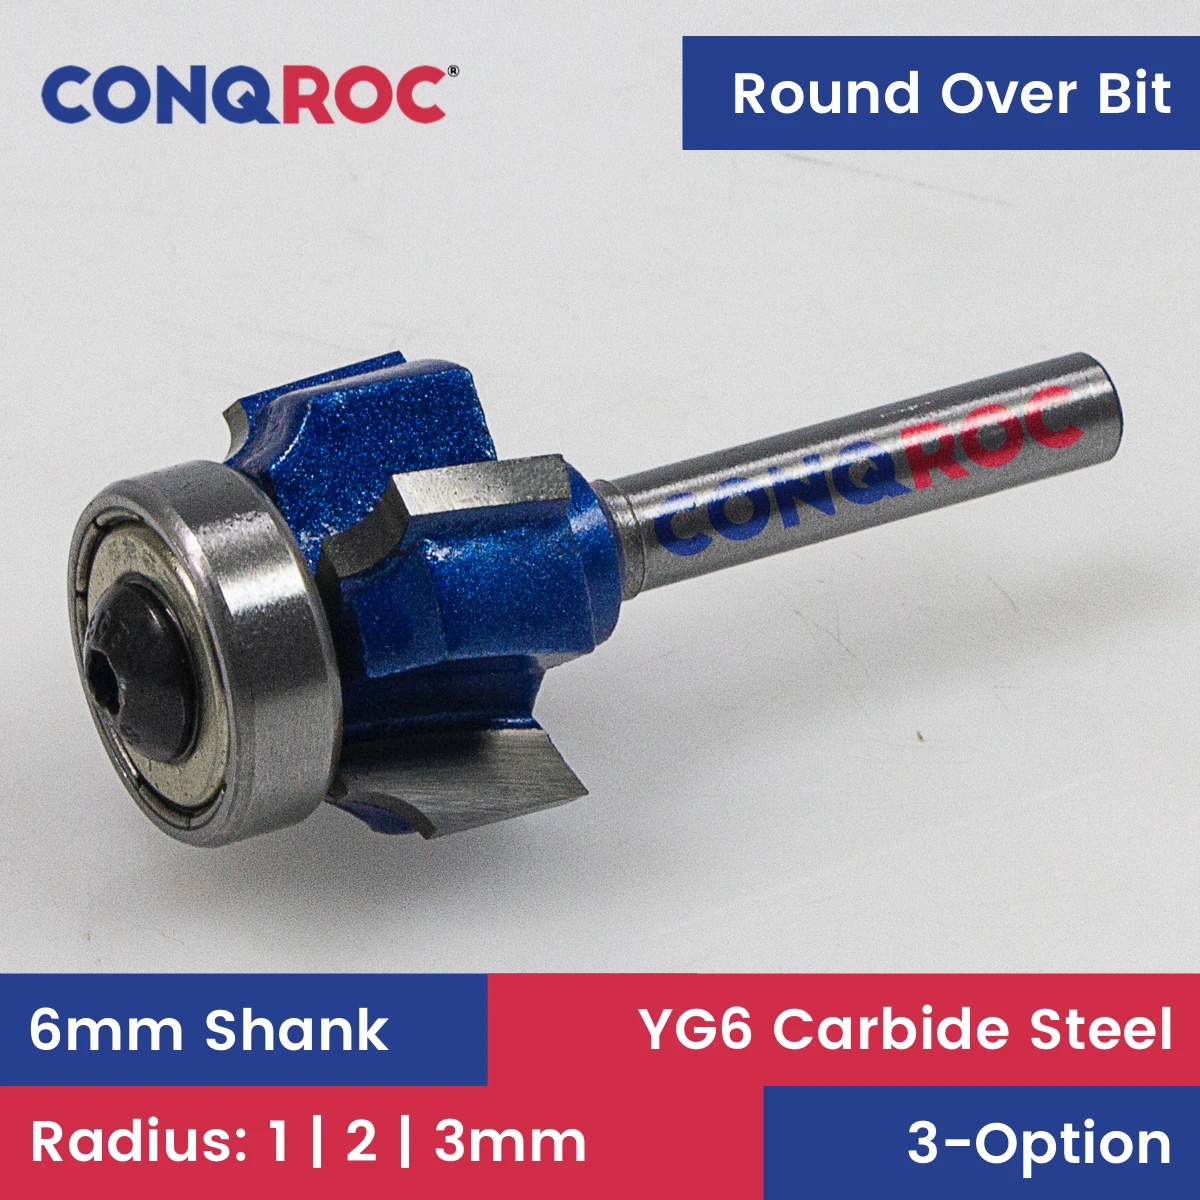 

6mm Shank 4-Wing Round Over Router Bit with Top Bearing Radius 3-Option R1 | R2 | R3 Woodworking Edge Trim Milling Cutter